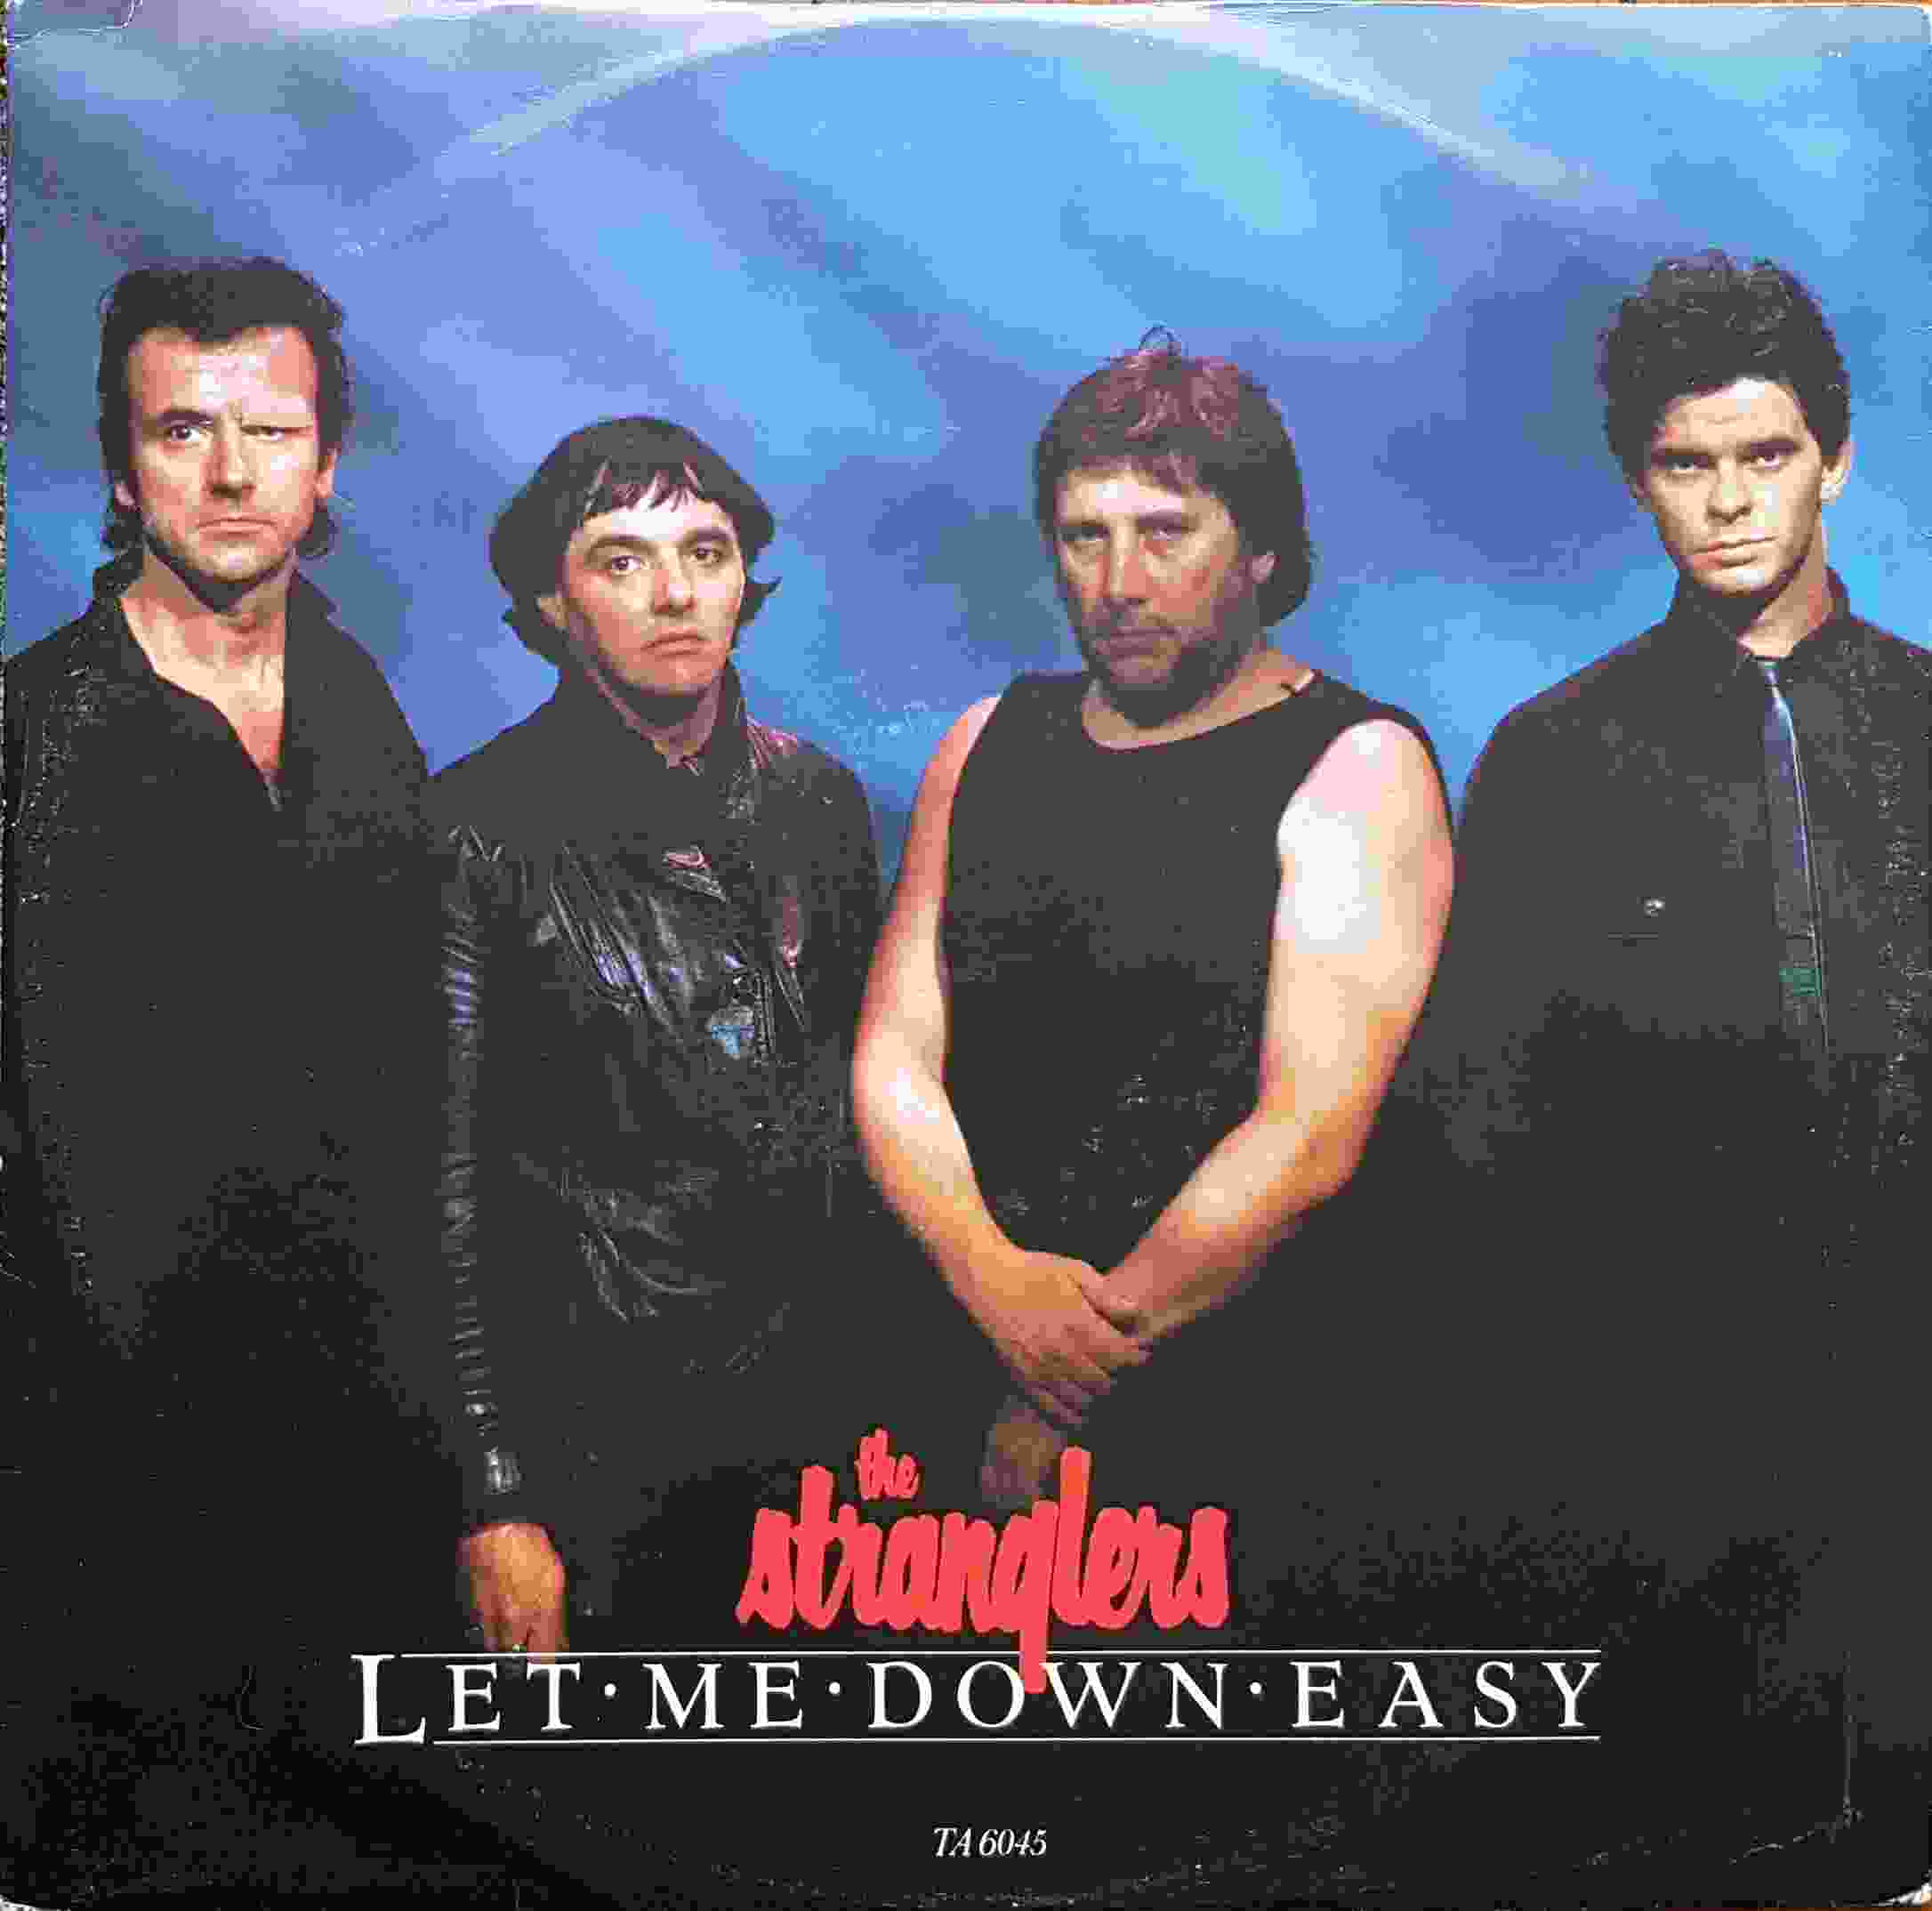 Picture of TA 6045 Let me down easy by artist The Stranglers 